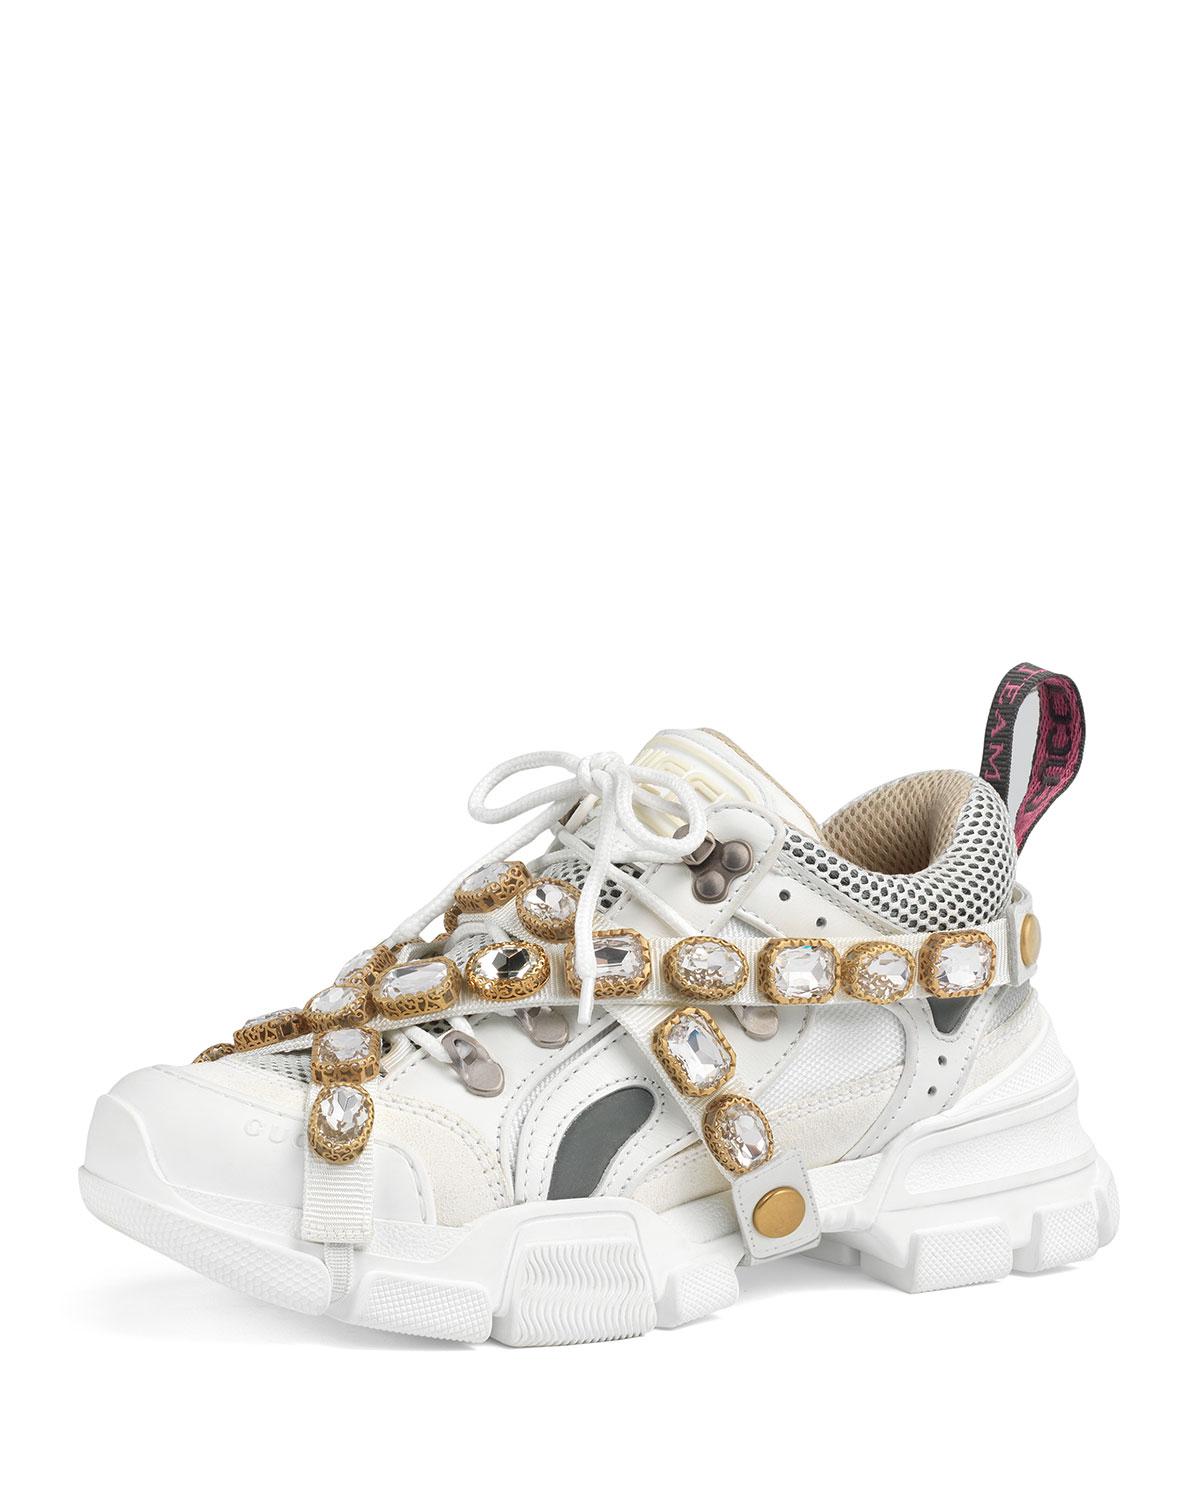 Gucci Sneaker With Removable Crystals in White for Men - Save 40% - Lyst